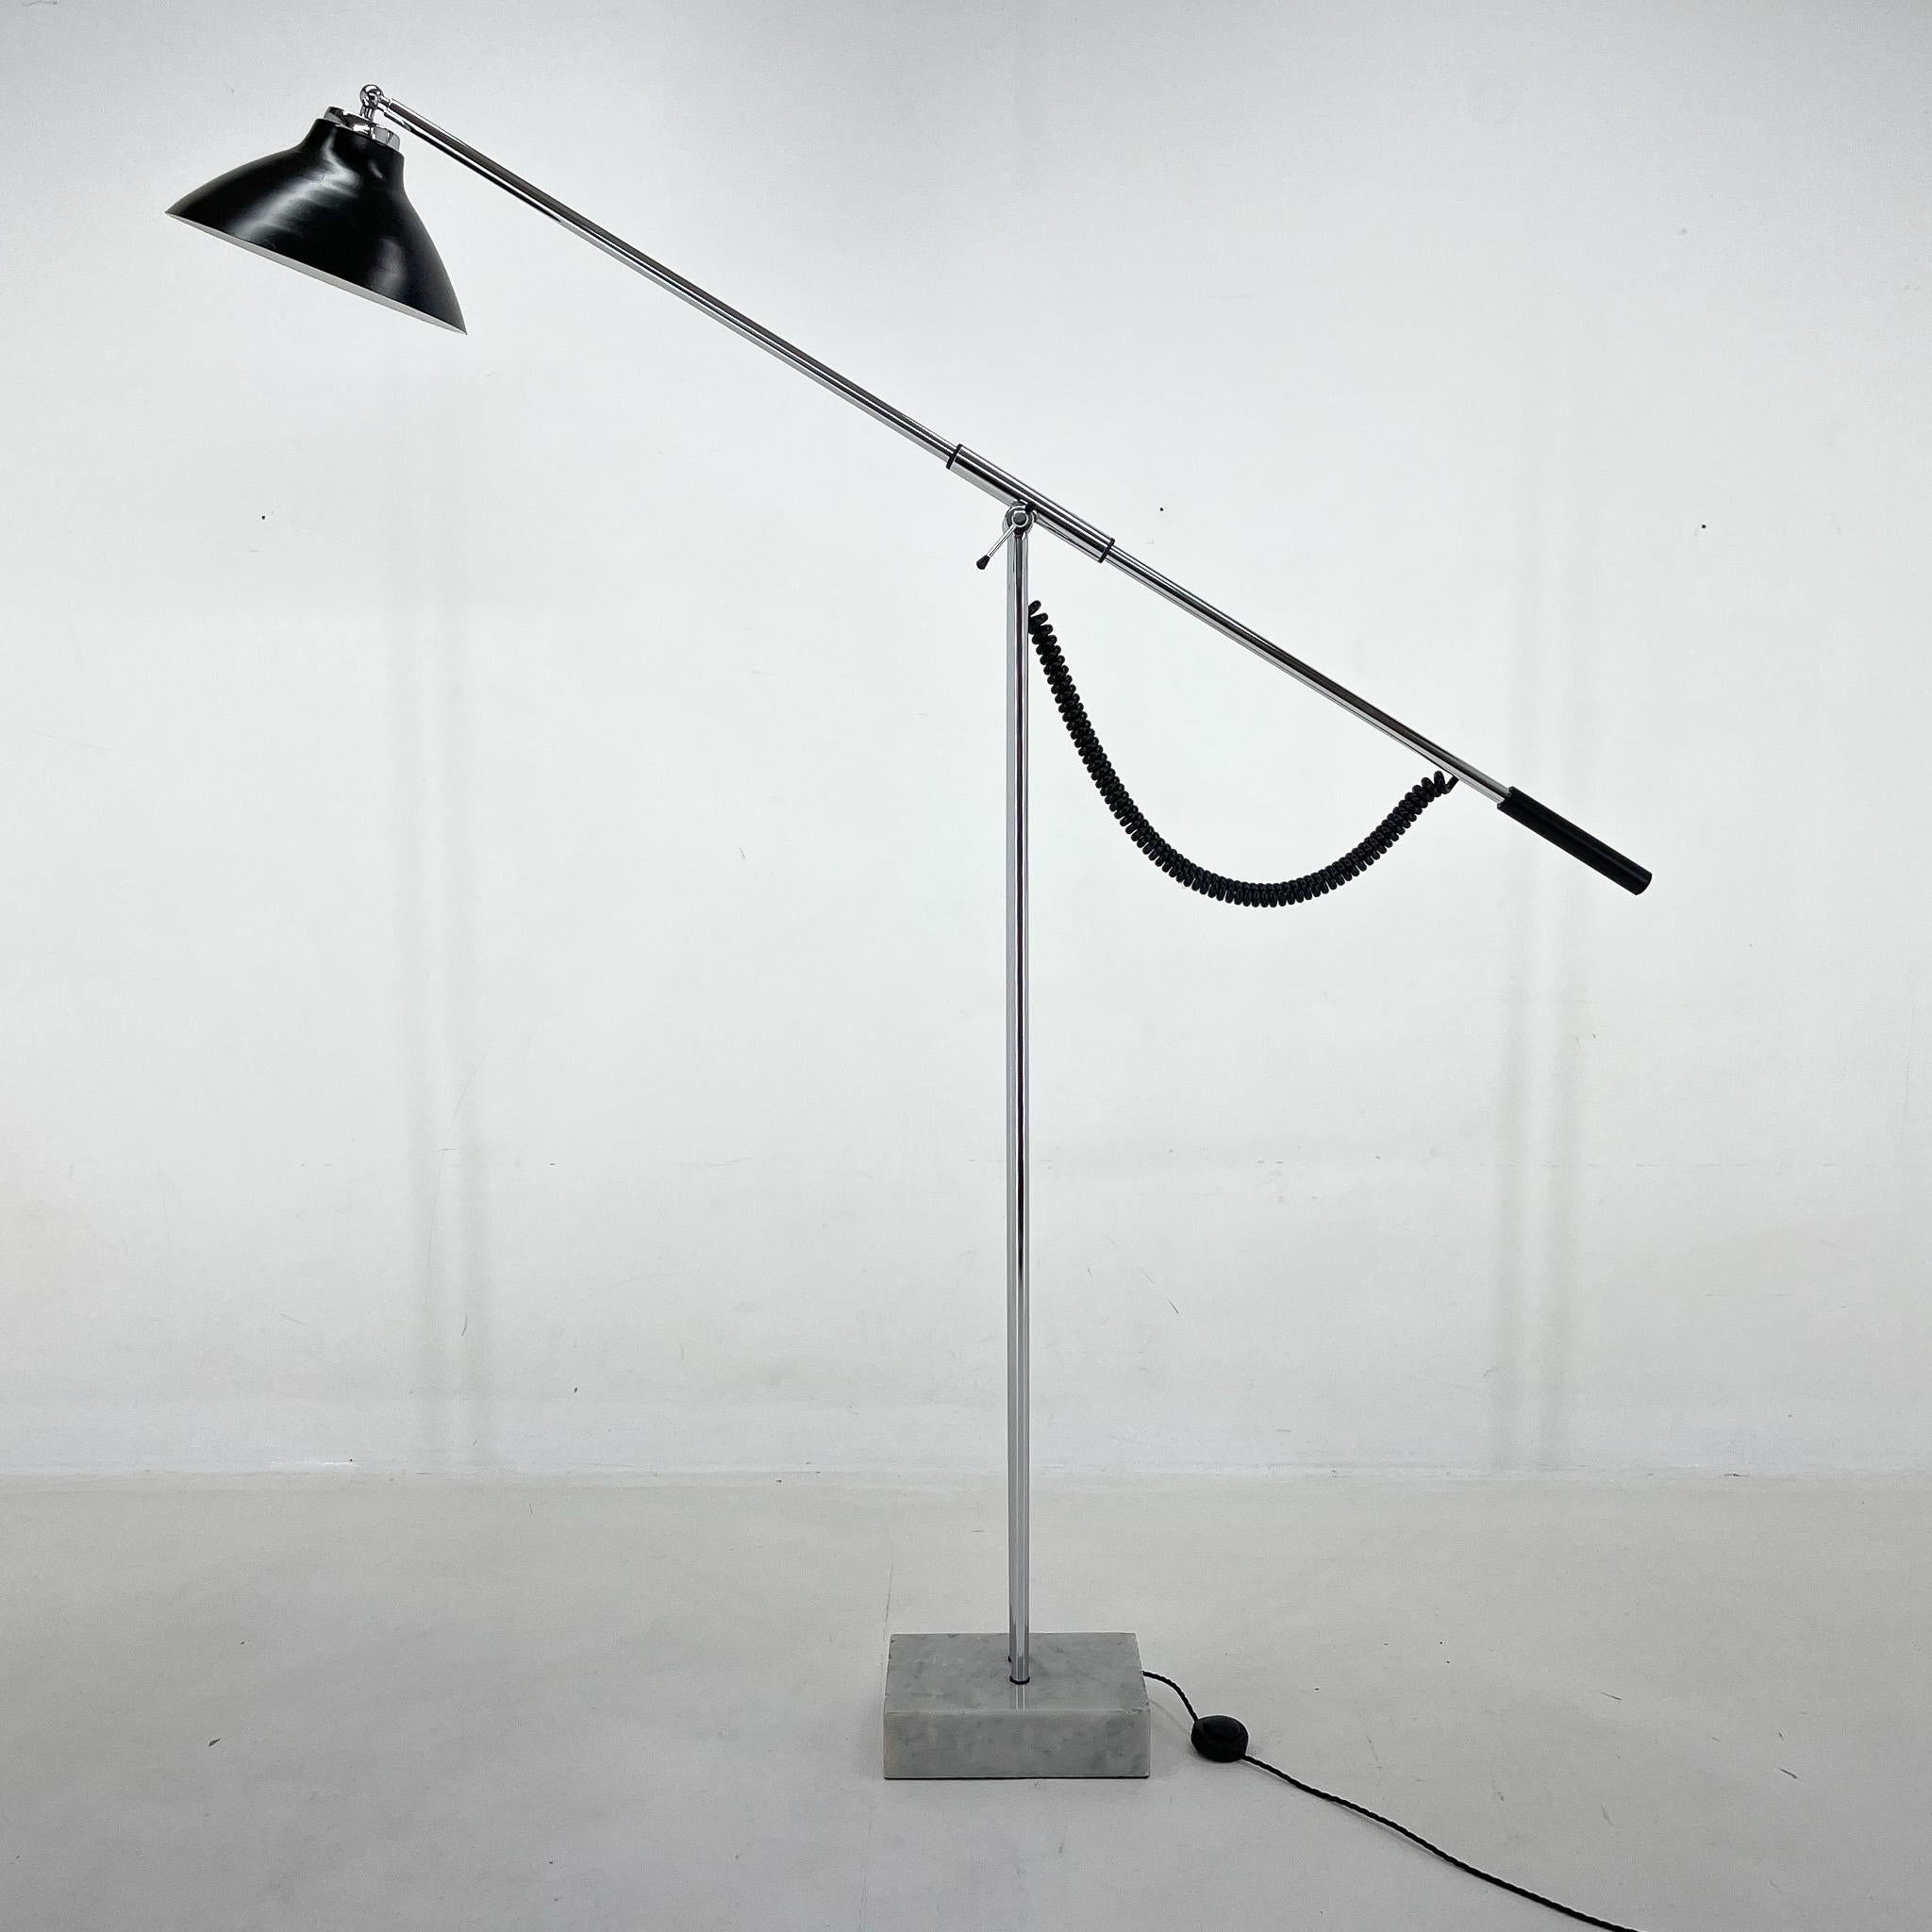 Unique adjustable floor lamp with extendable arm made in Italy in the 1960's. The lamp has a marble base, chrome body, black lacquered shade and has been completely restored and rewired with step-on switch. There are some signs of use on the marble